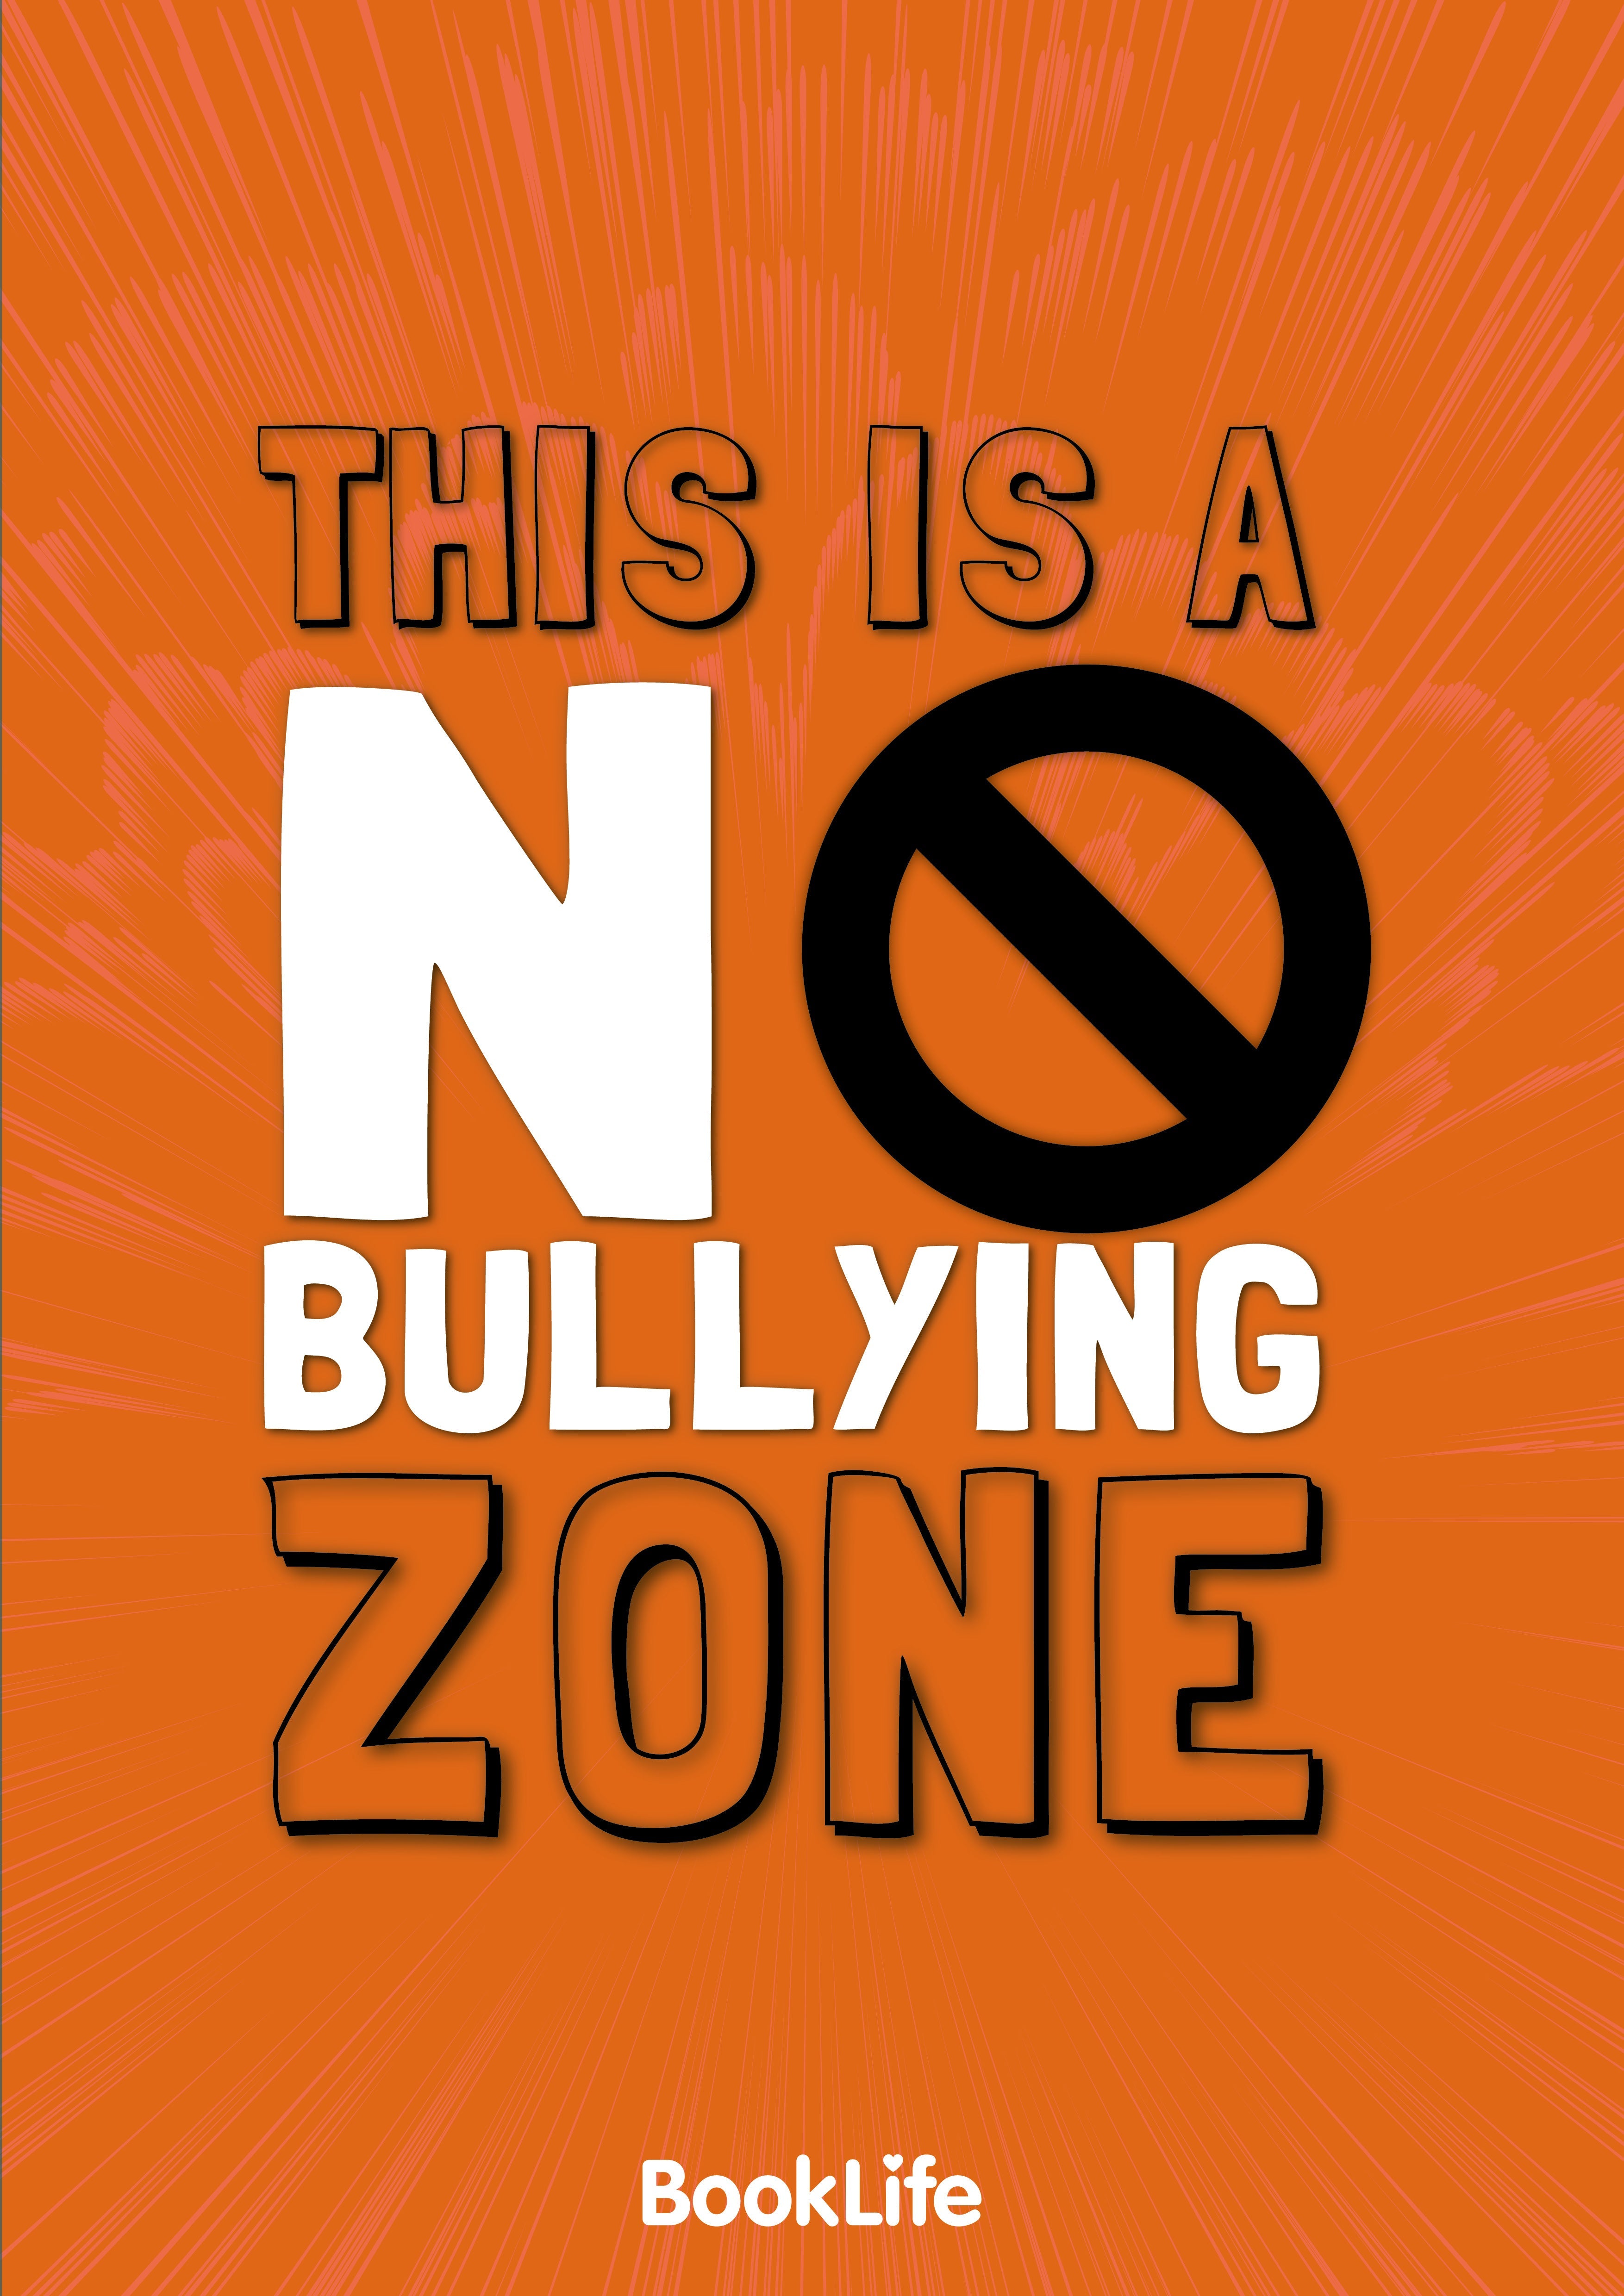 Free No Bullying Zone Poster by BookLife